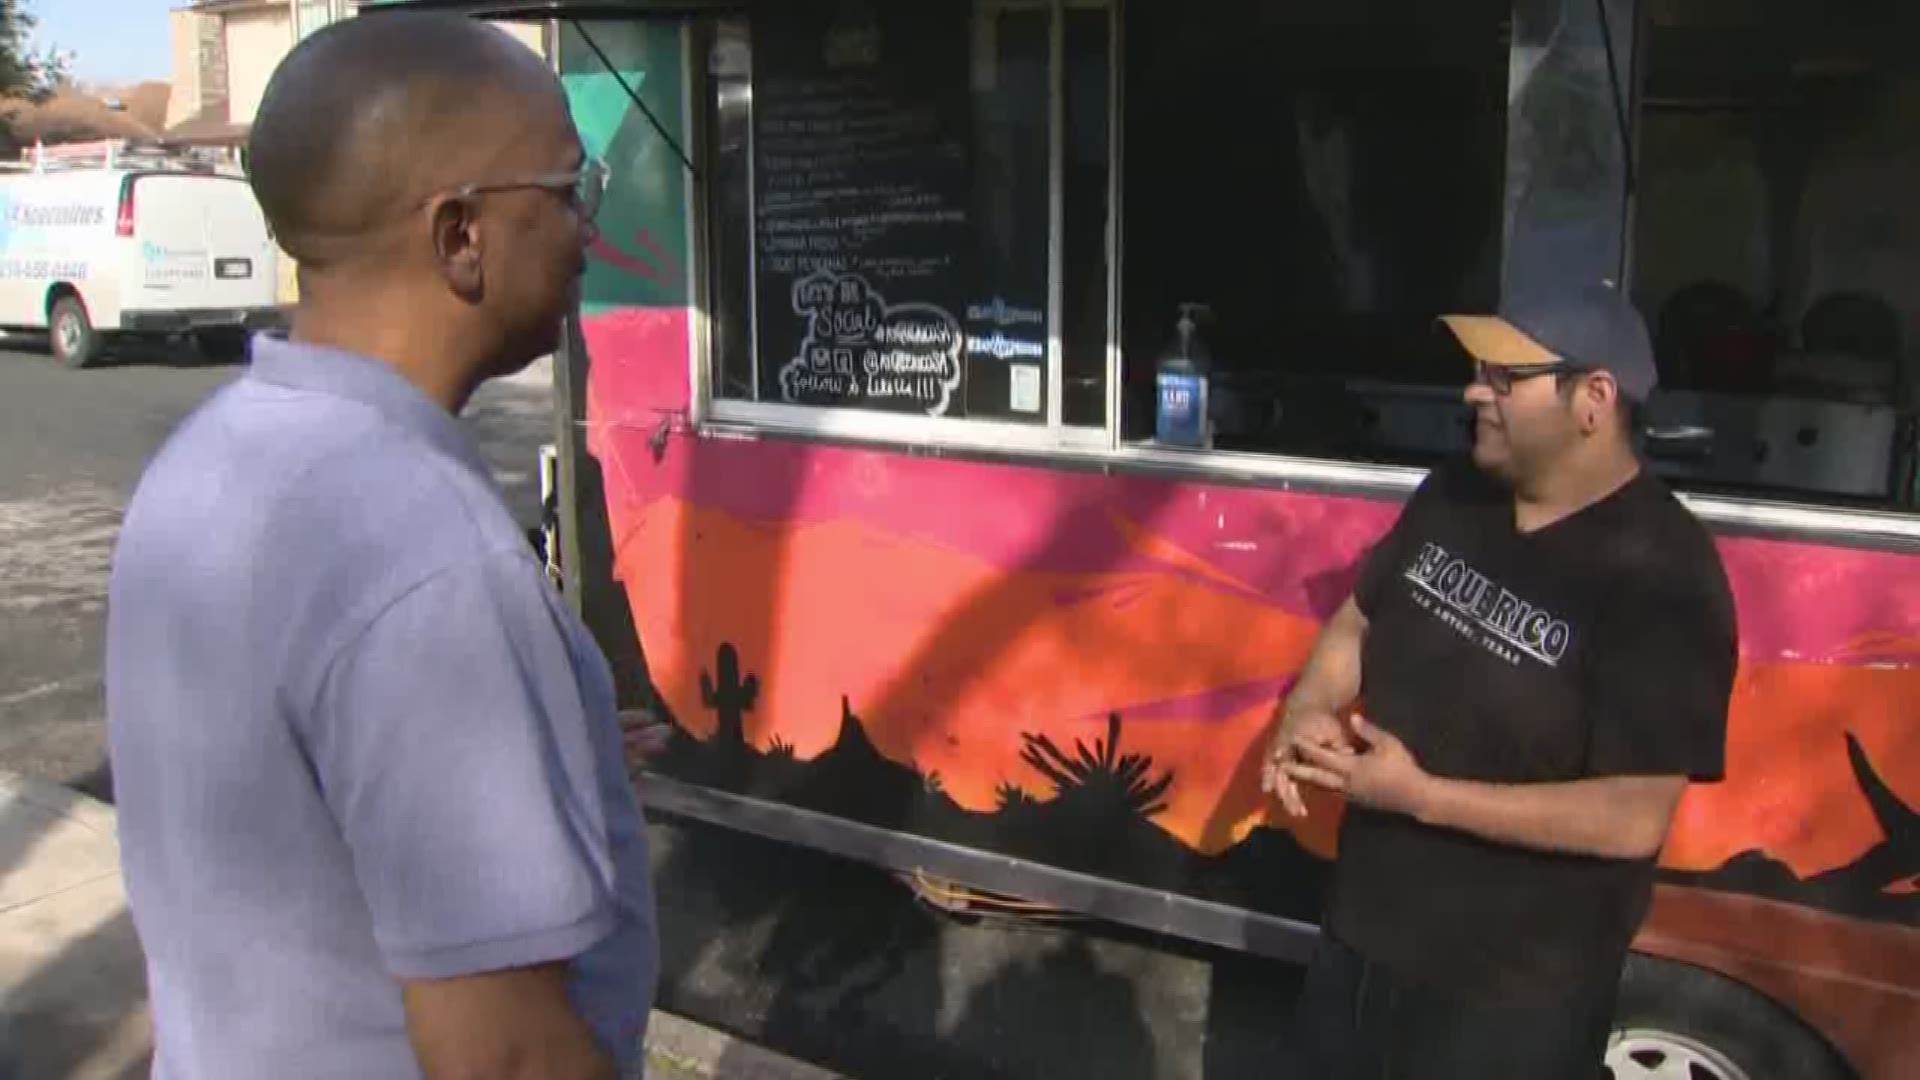 Marvin Hurst talks to the owner of the Ay Que Rico Food Truck about what inspired him to start his business.